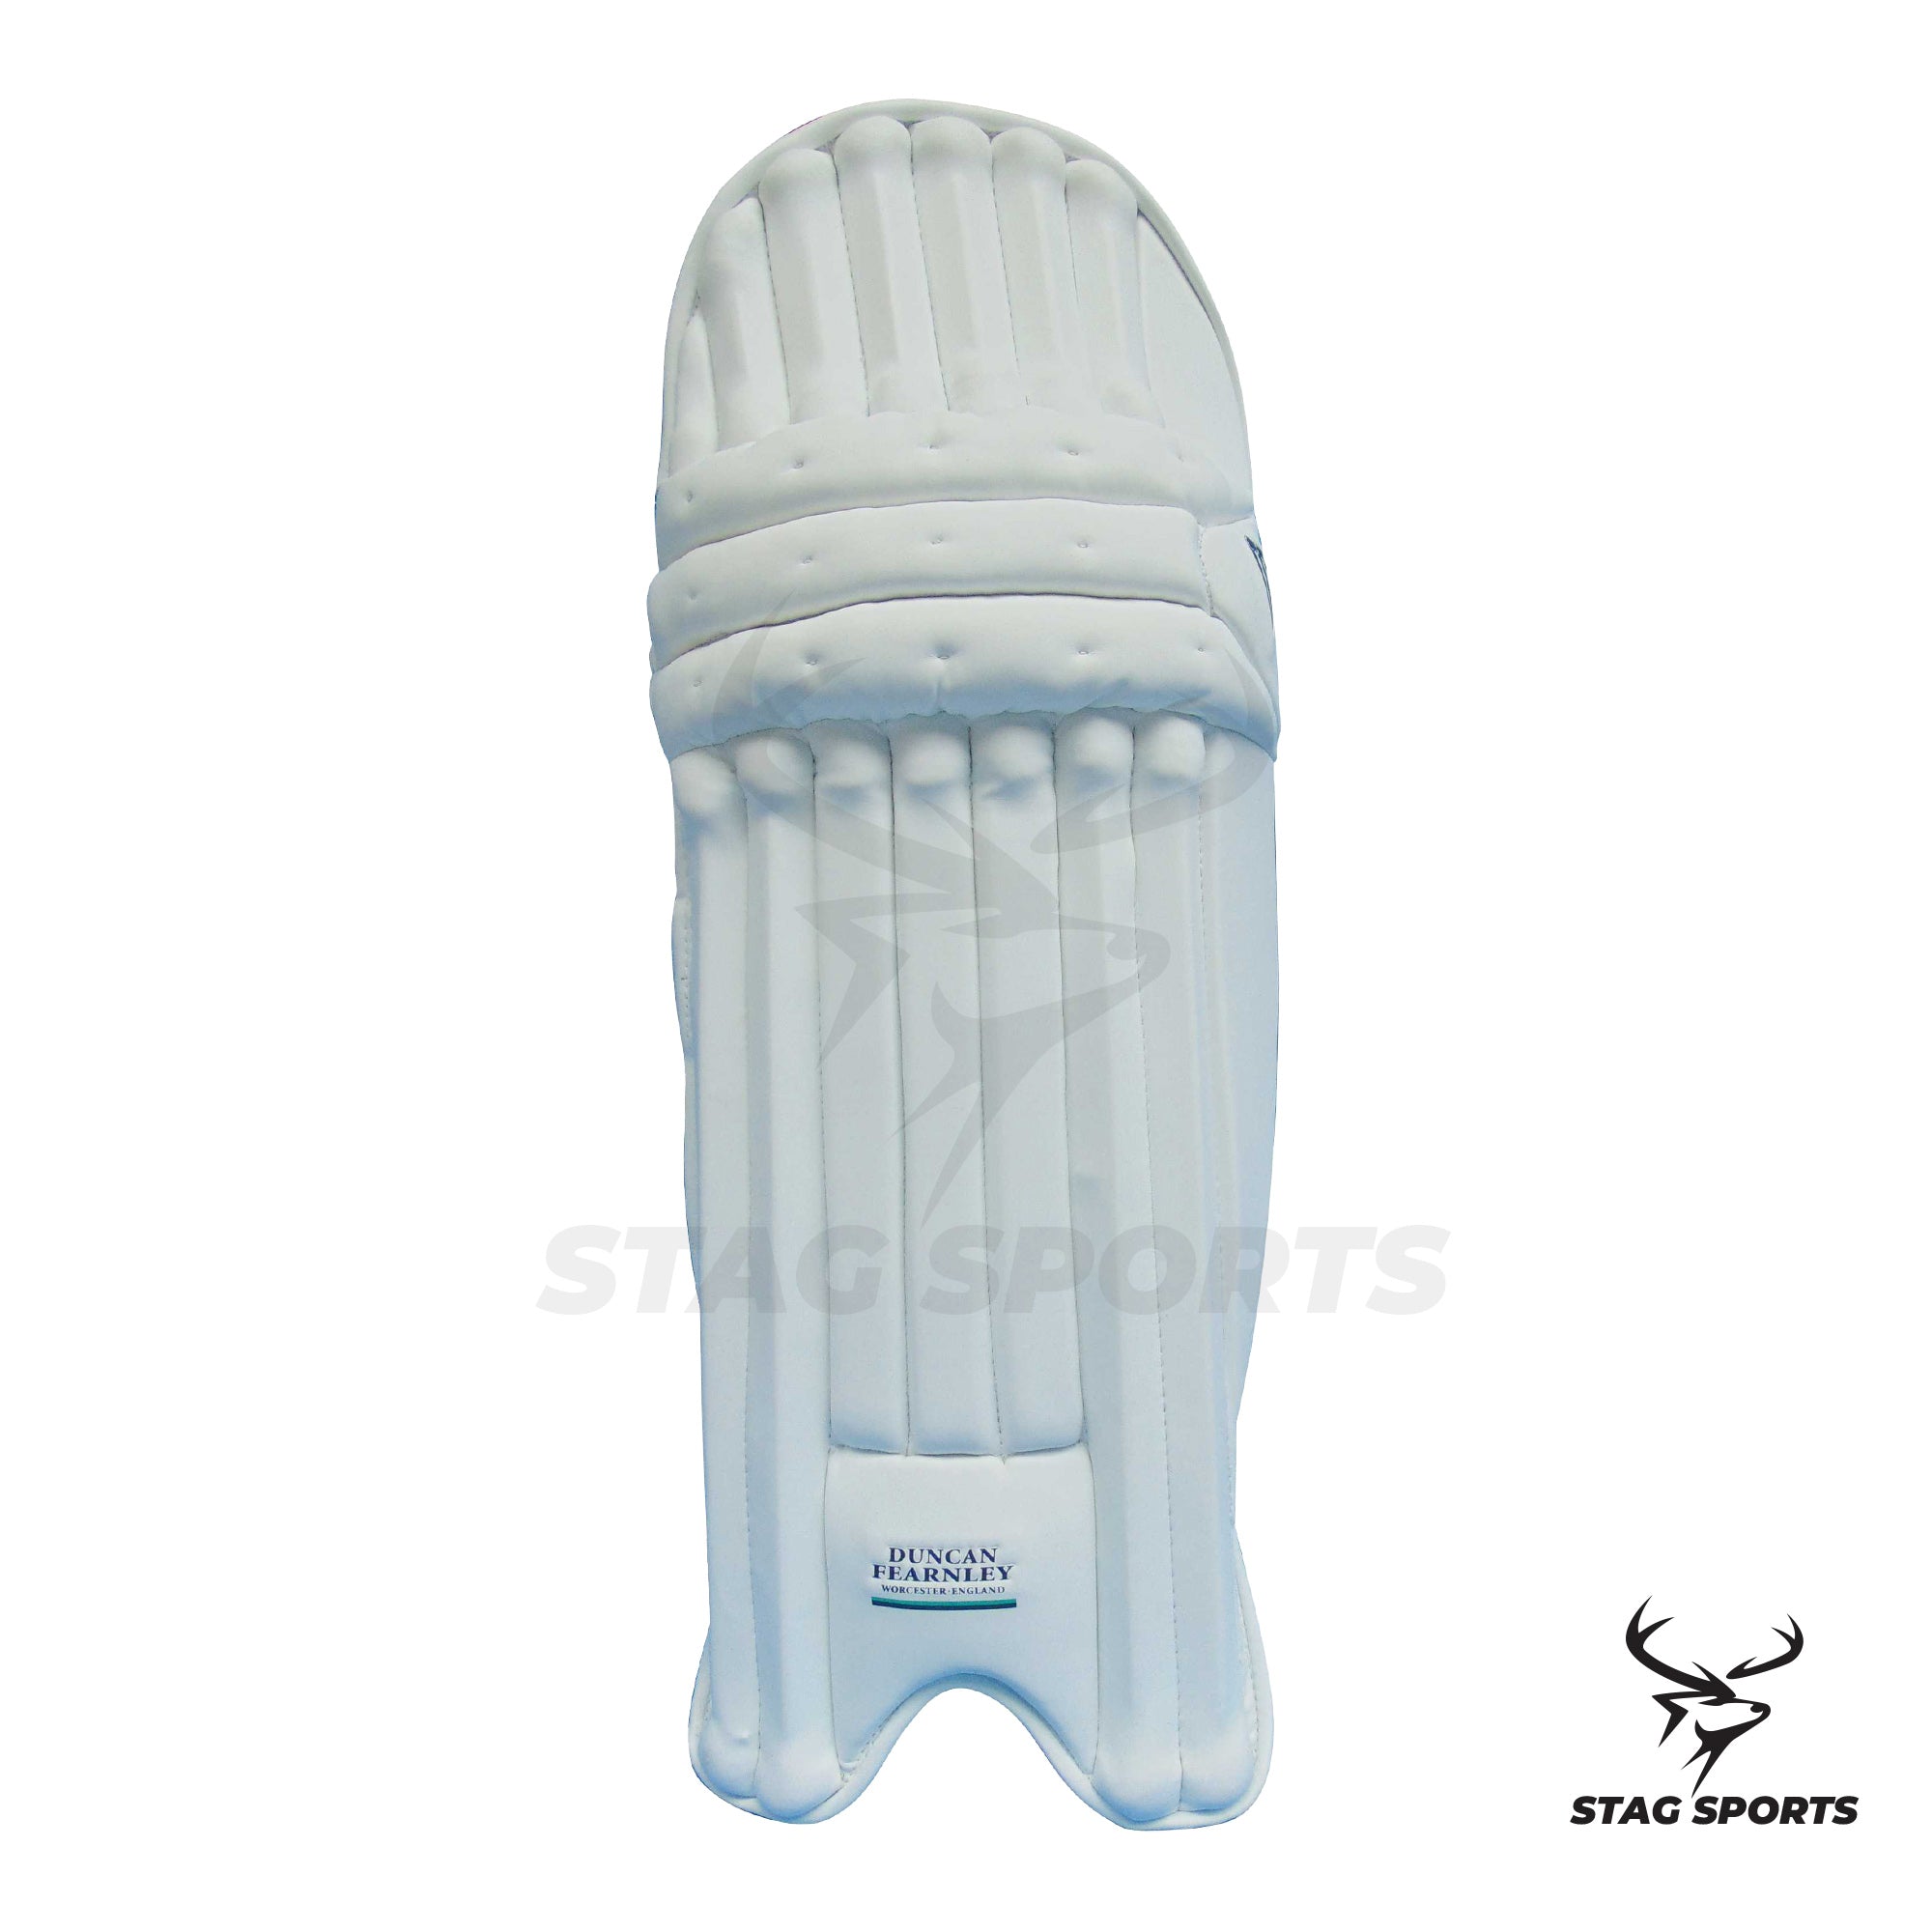 Buy Duncan Fearnley Magnum Cricket Batting Leg Guards from Stagsports